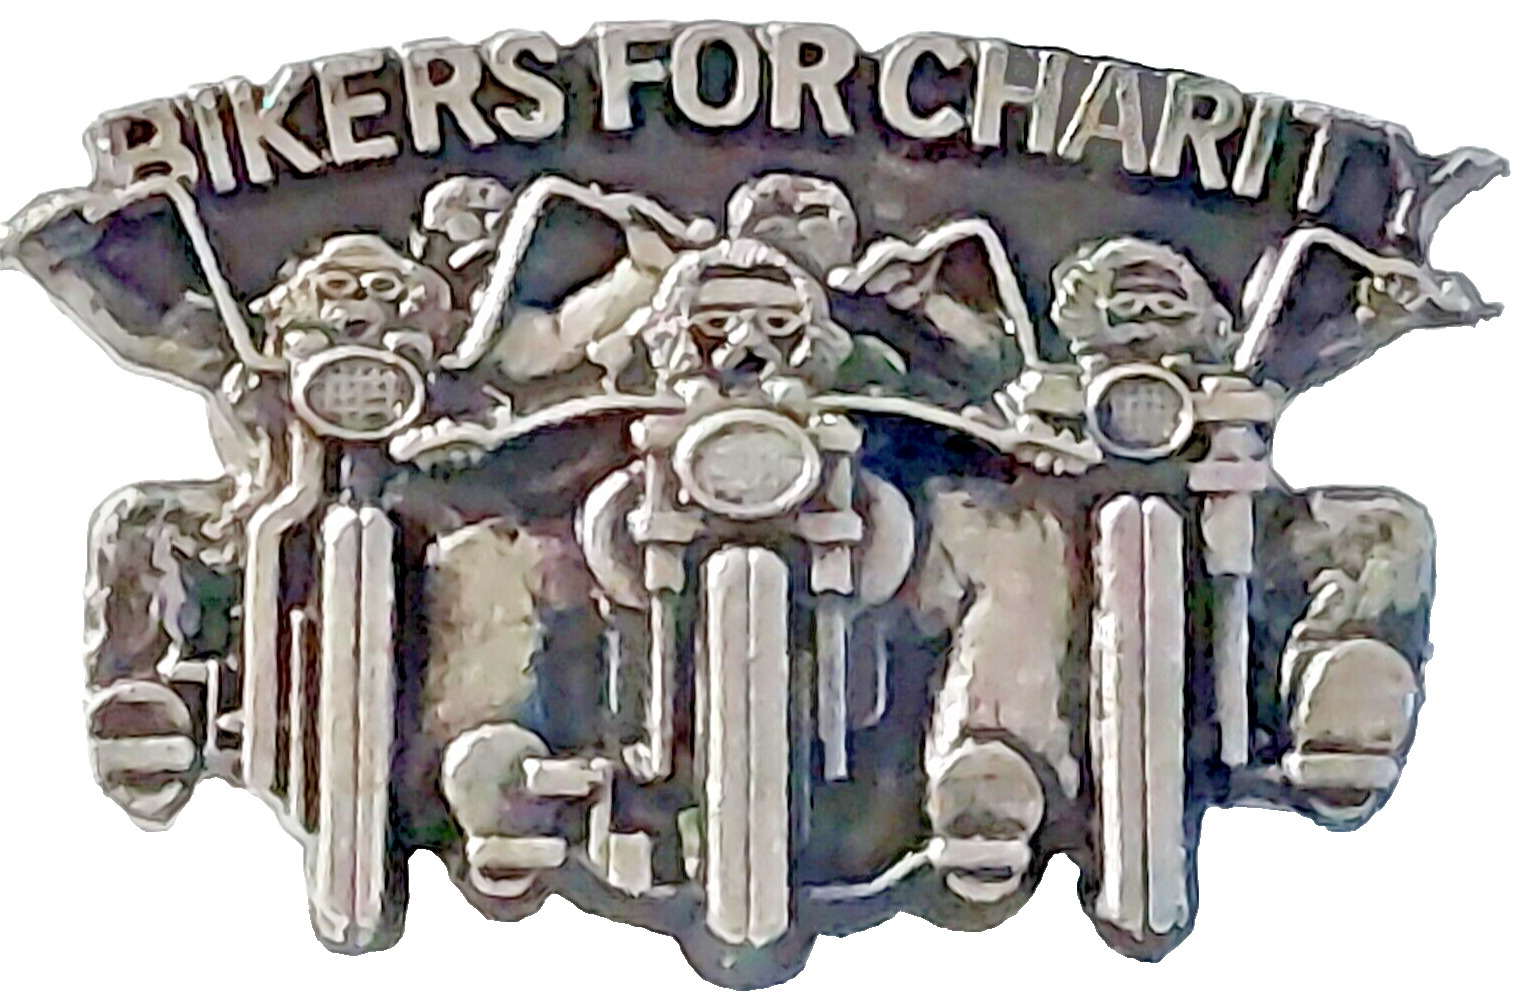 Motorcycle Bikers For Charity Lapel Pin